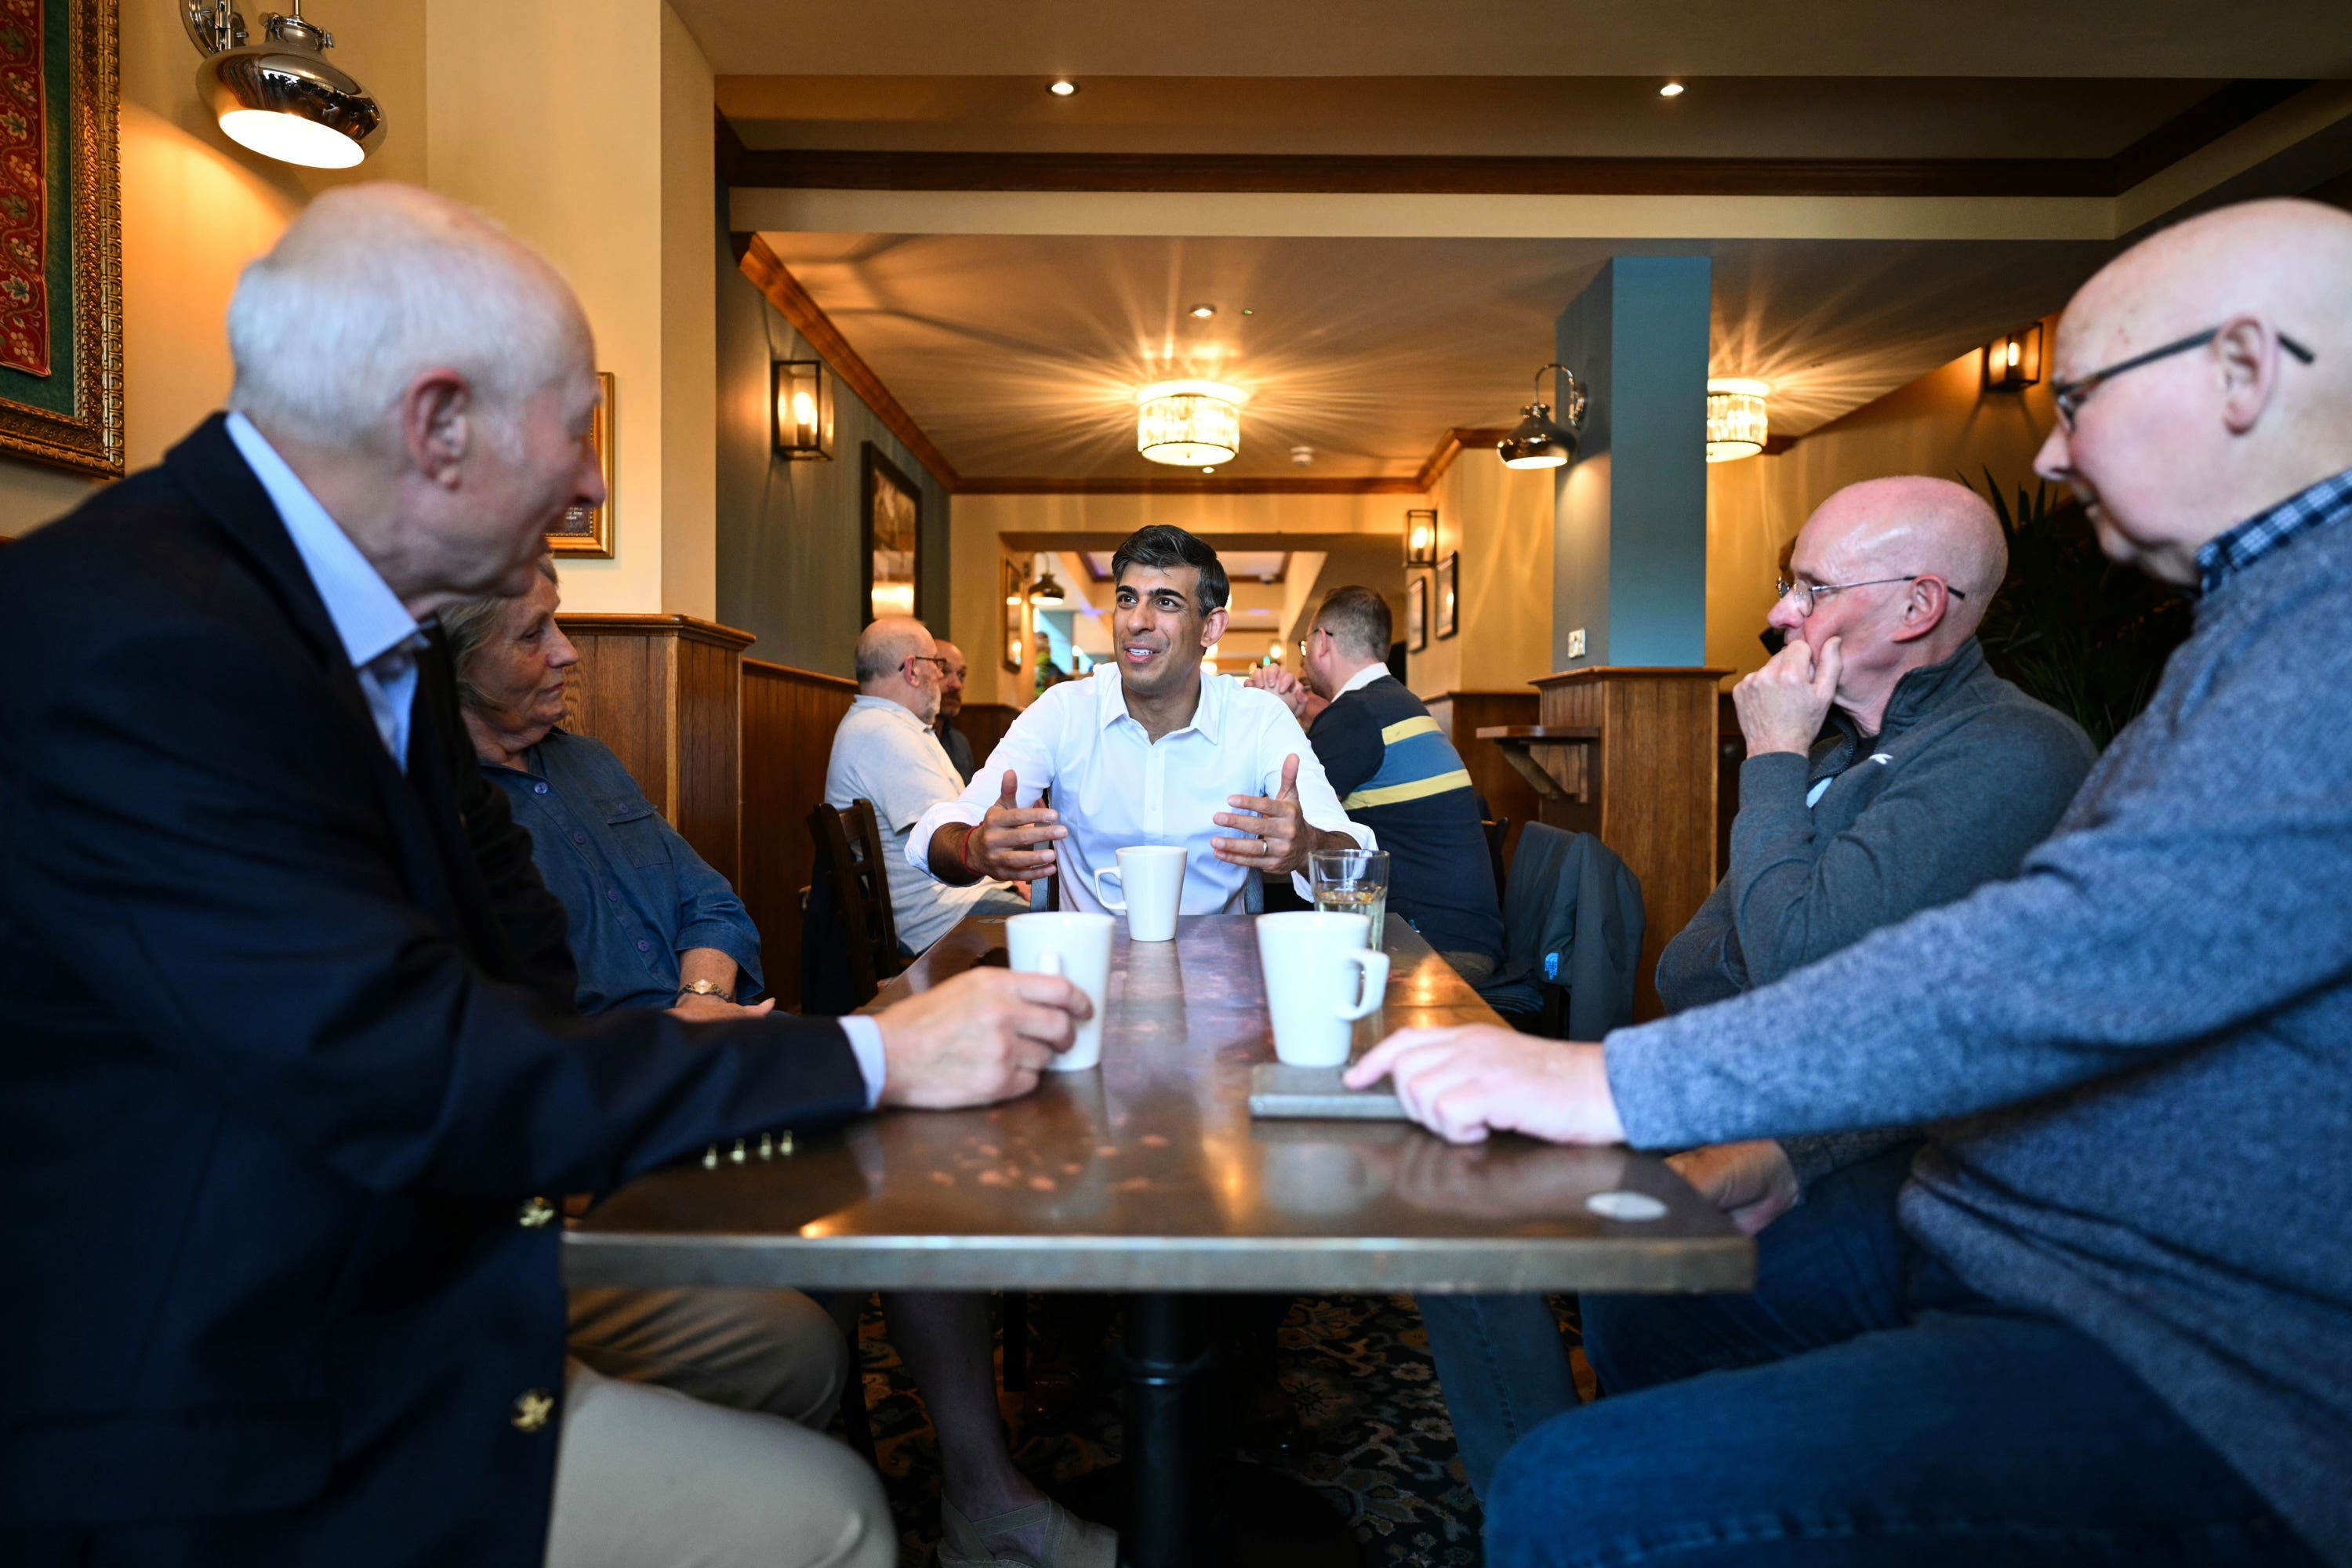 The prime minister meeting with veterans on Saturday morning